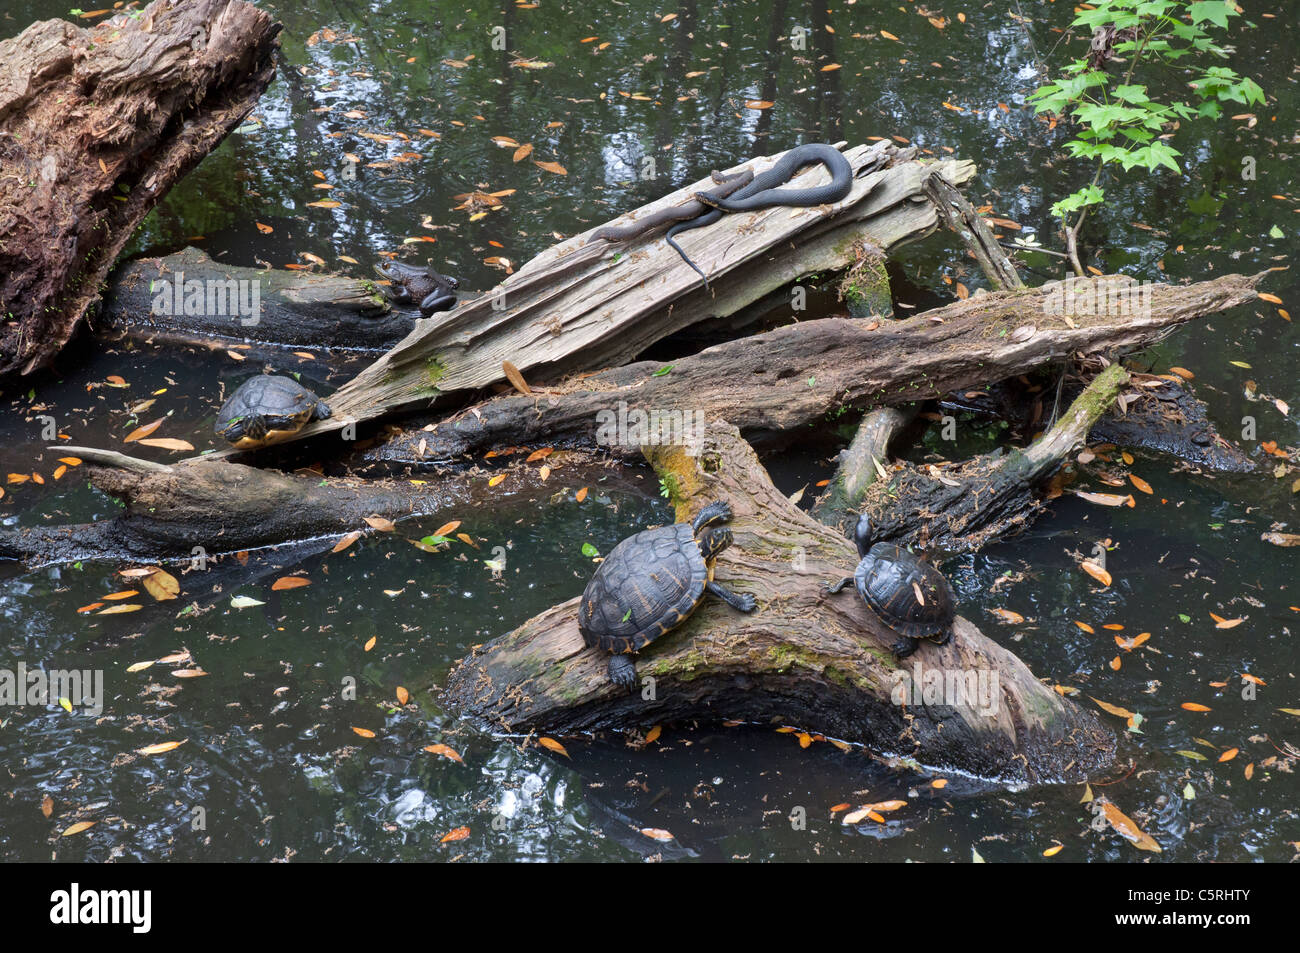 Santa Fe College Teaching Zoo Gainesville Florida. A Florida pond featuring aquatic turtles and snakes Stock Photo